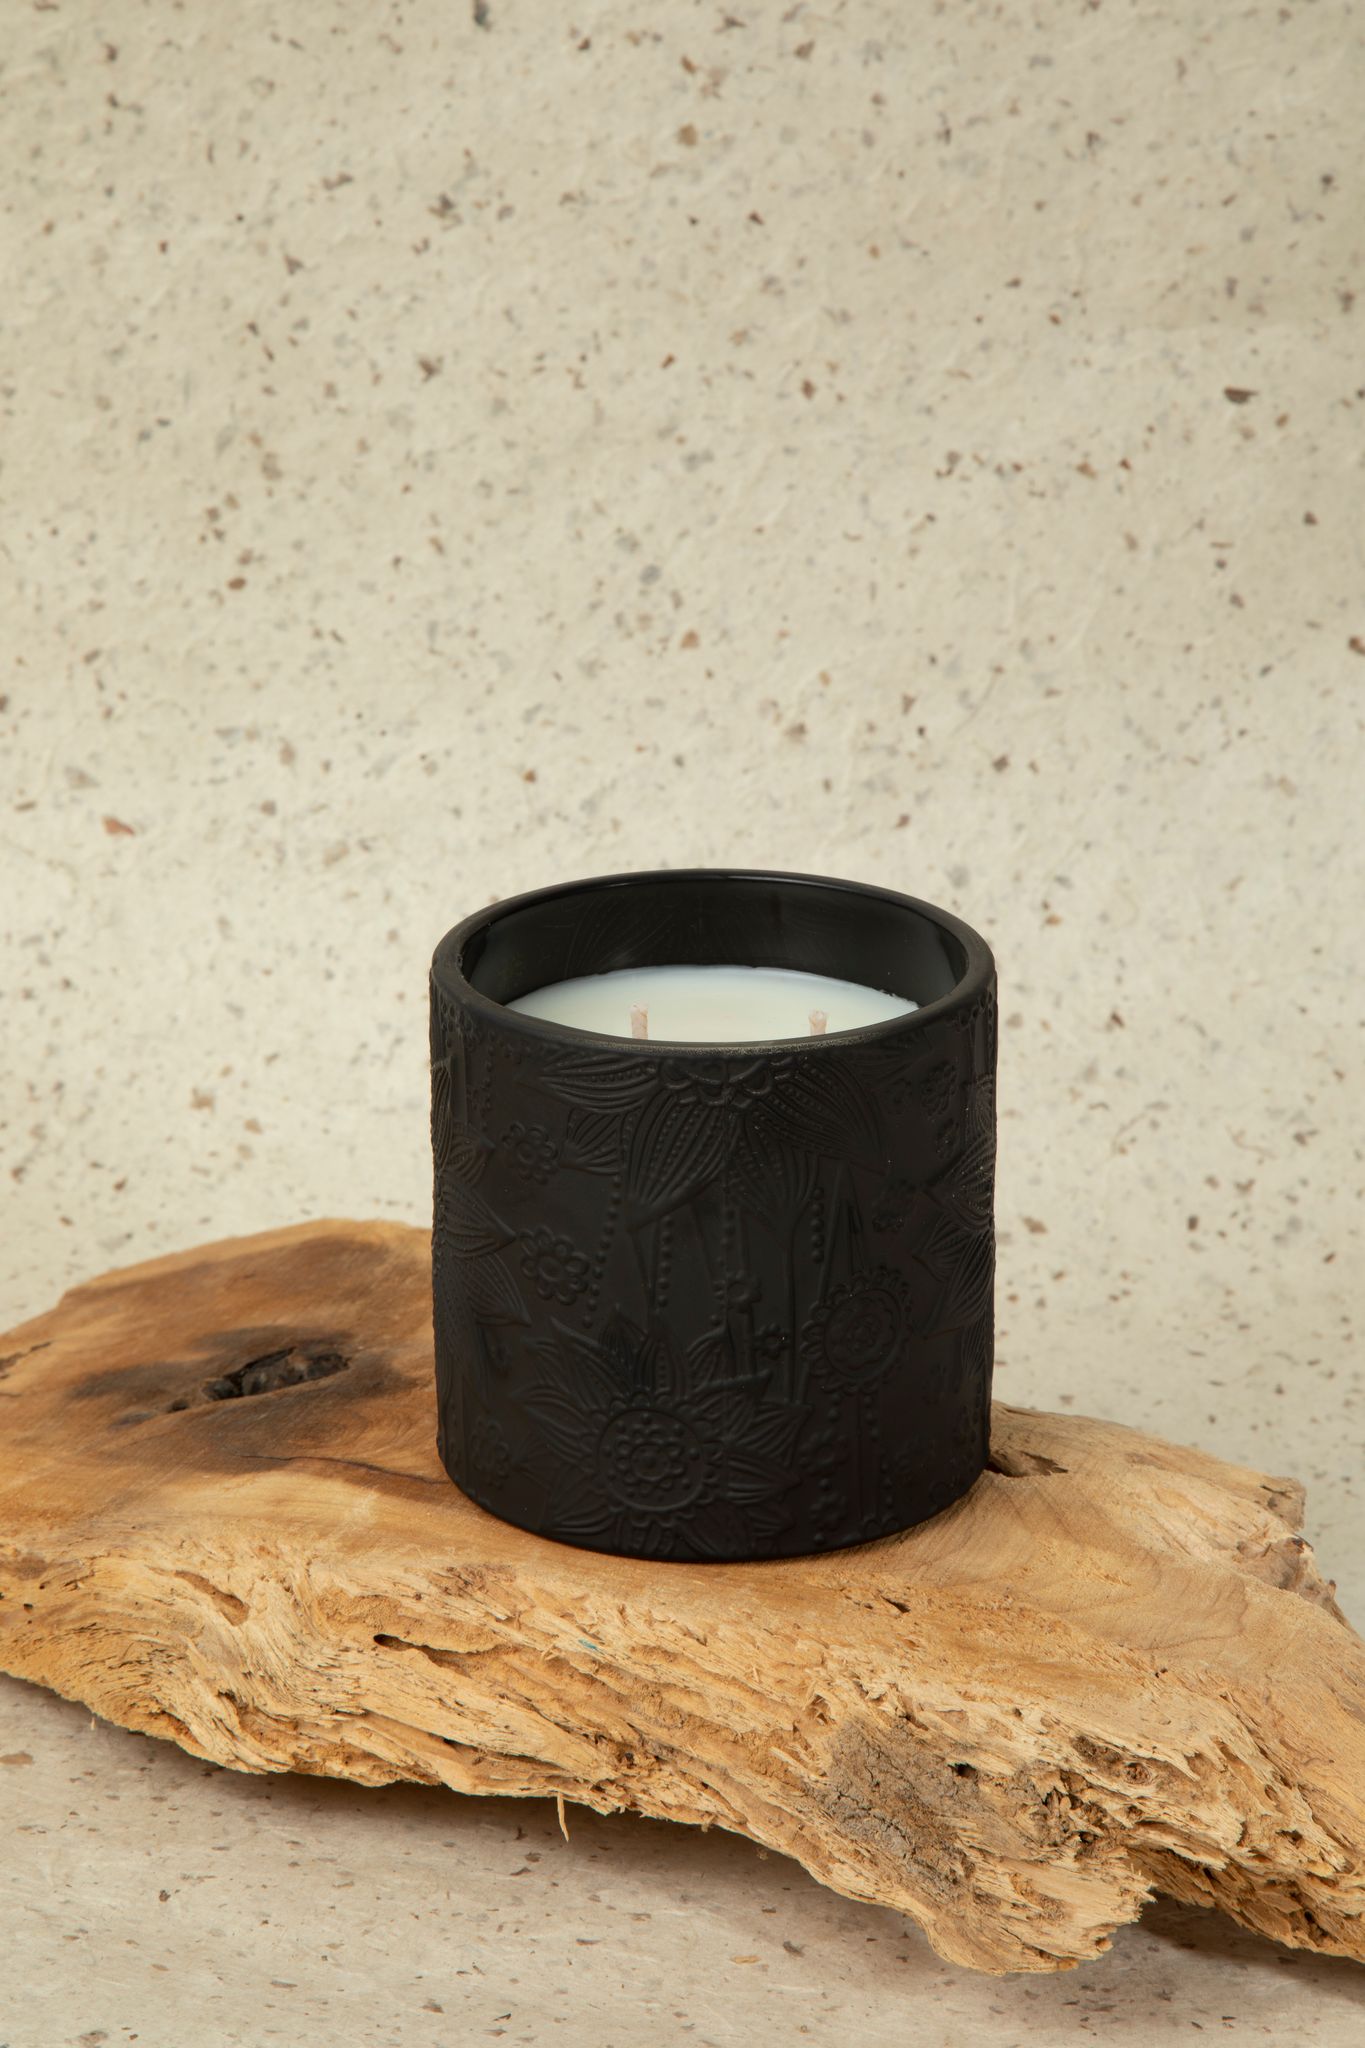 the Signature MIND candle